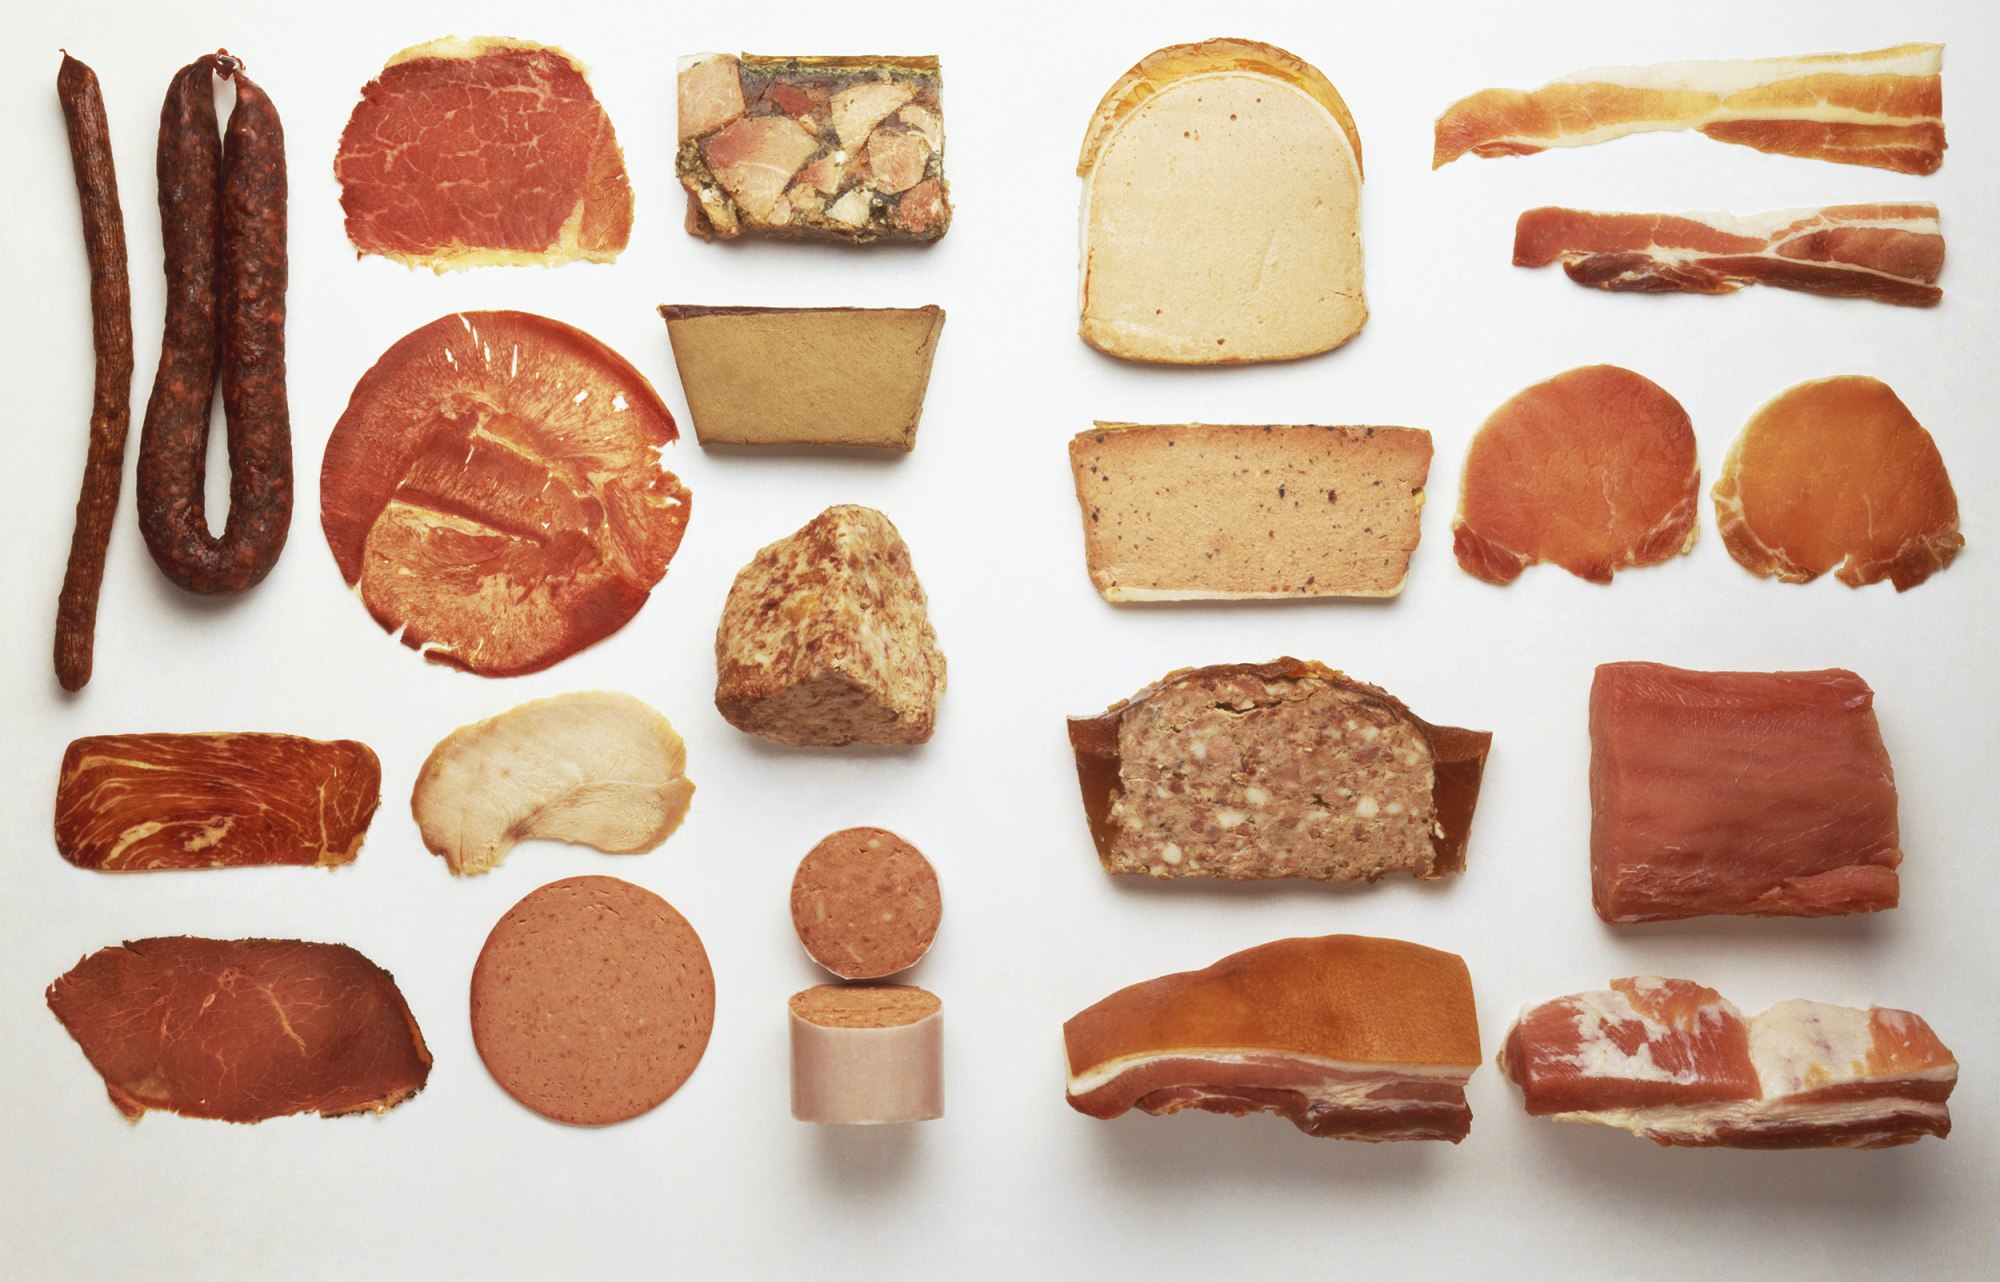 What exactly is a processed meat? And how much is safe to eat?